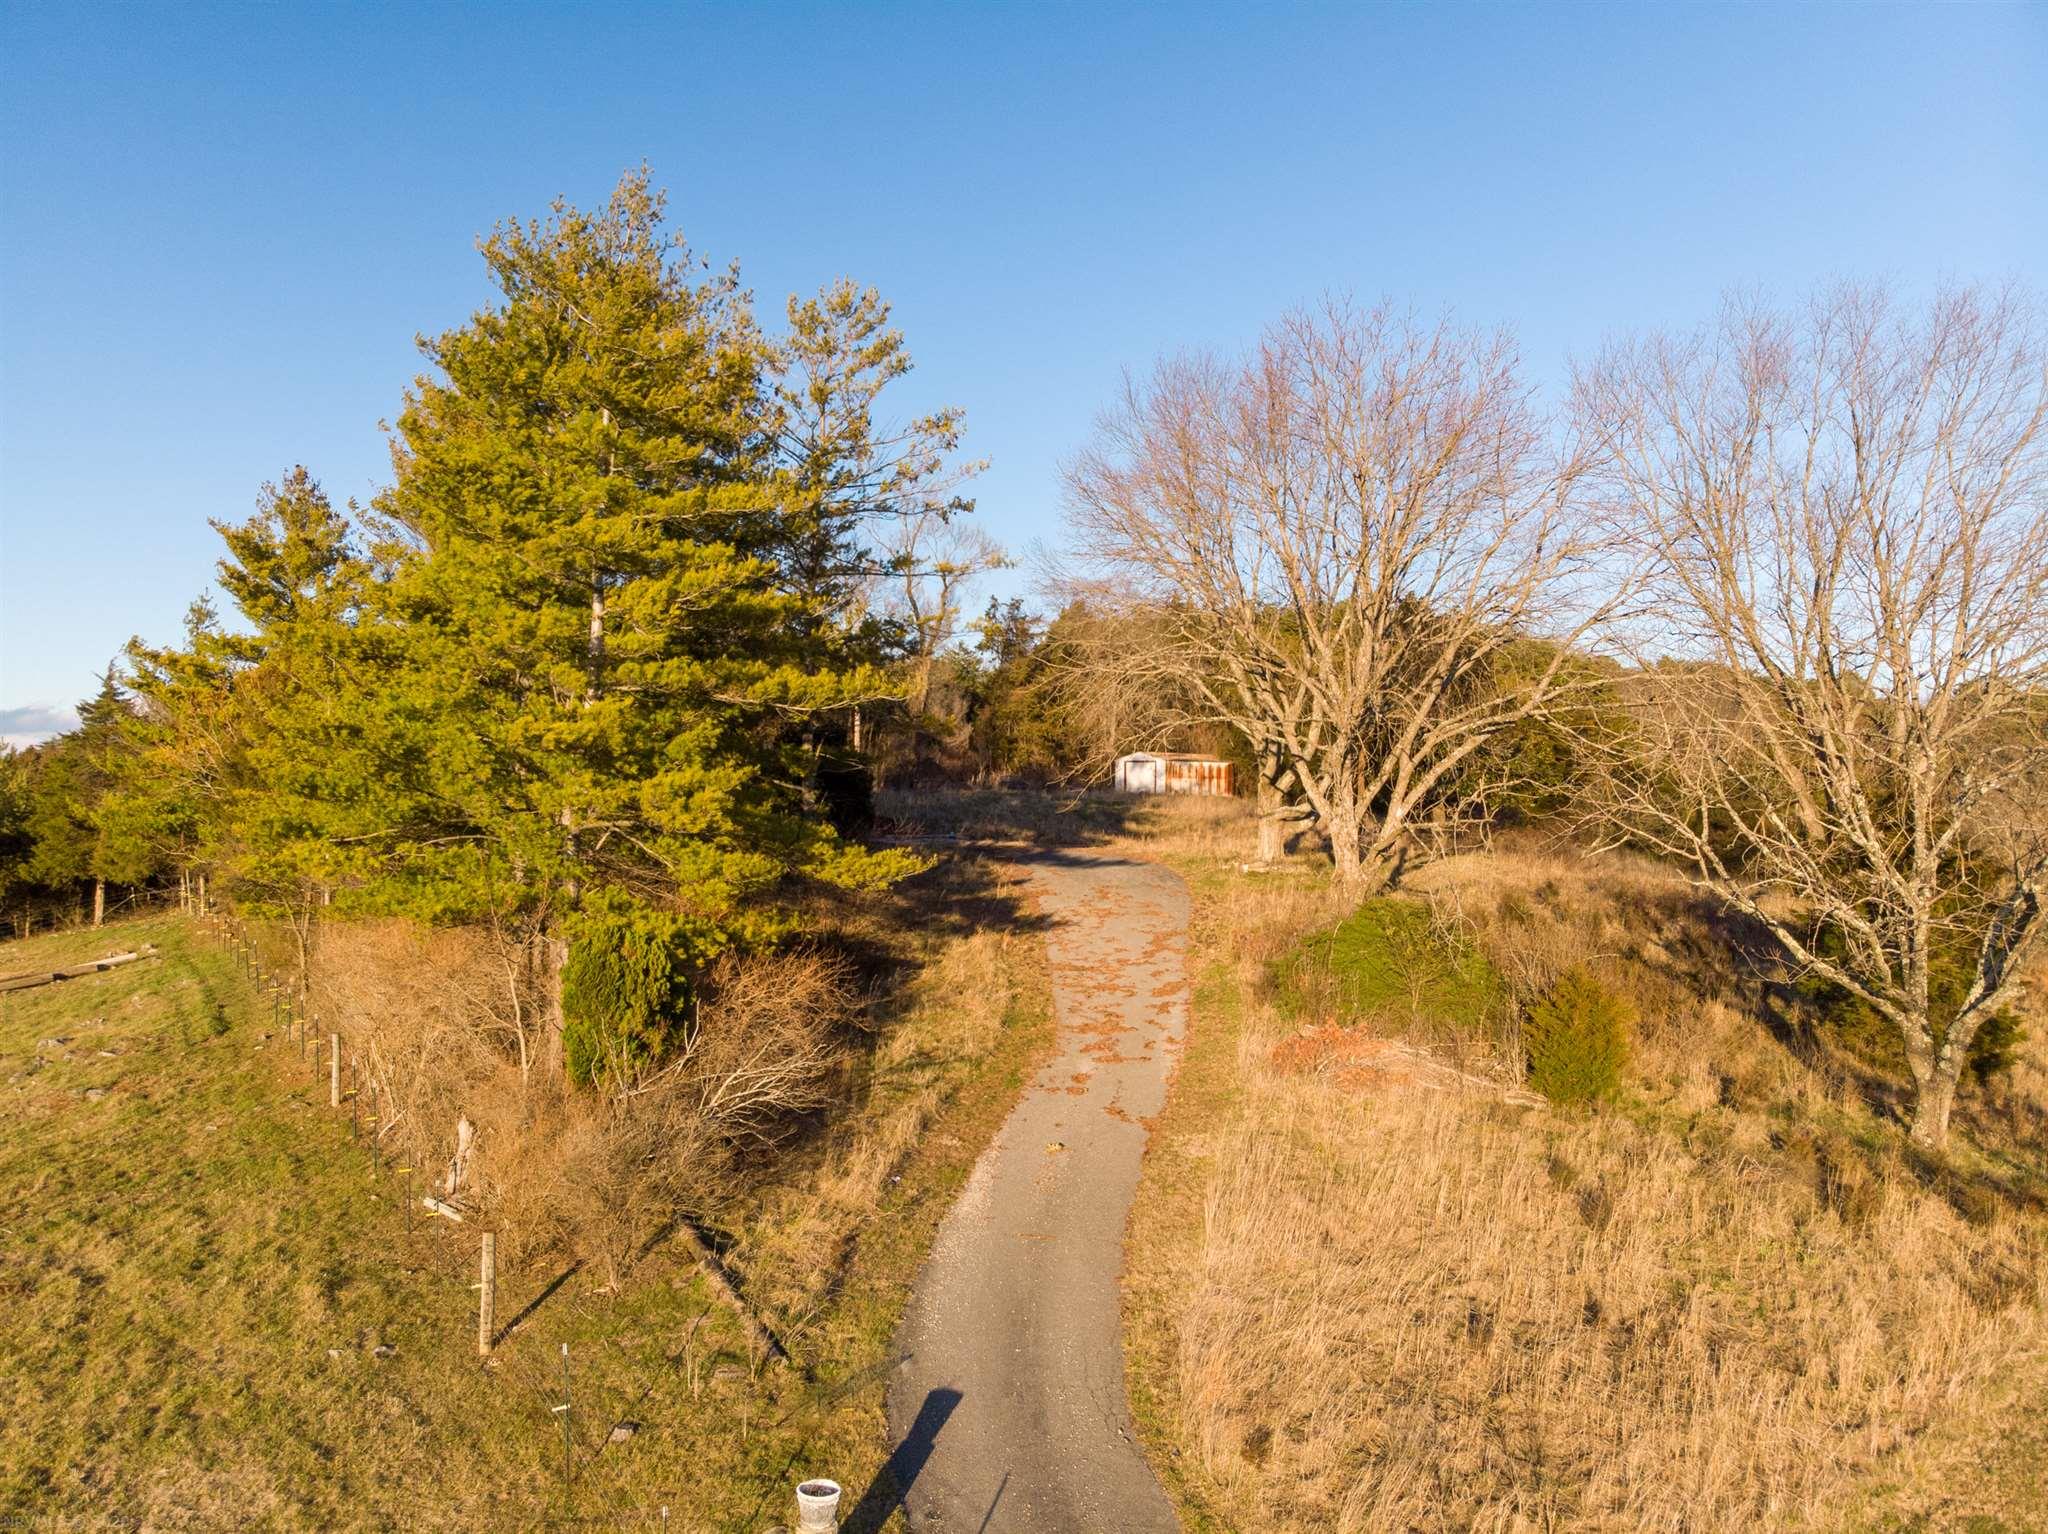 What an investment! Amazing, majestic views await on this peaceful 1.5+ acres overlooking the region with paved driveway. This property is located close to many amenities yet has a rural charm to it. Build your dream home, tiny home or modular on this lovely parcel of land.